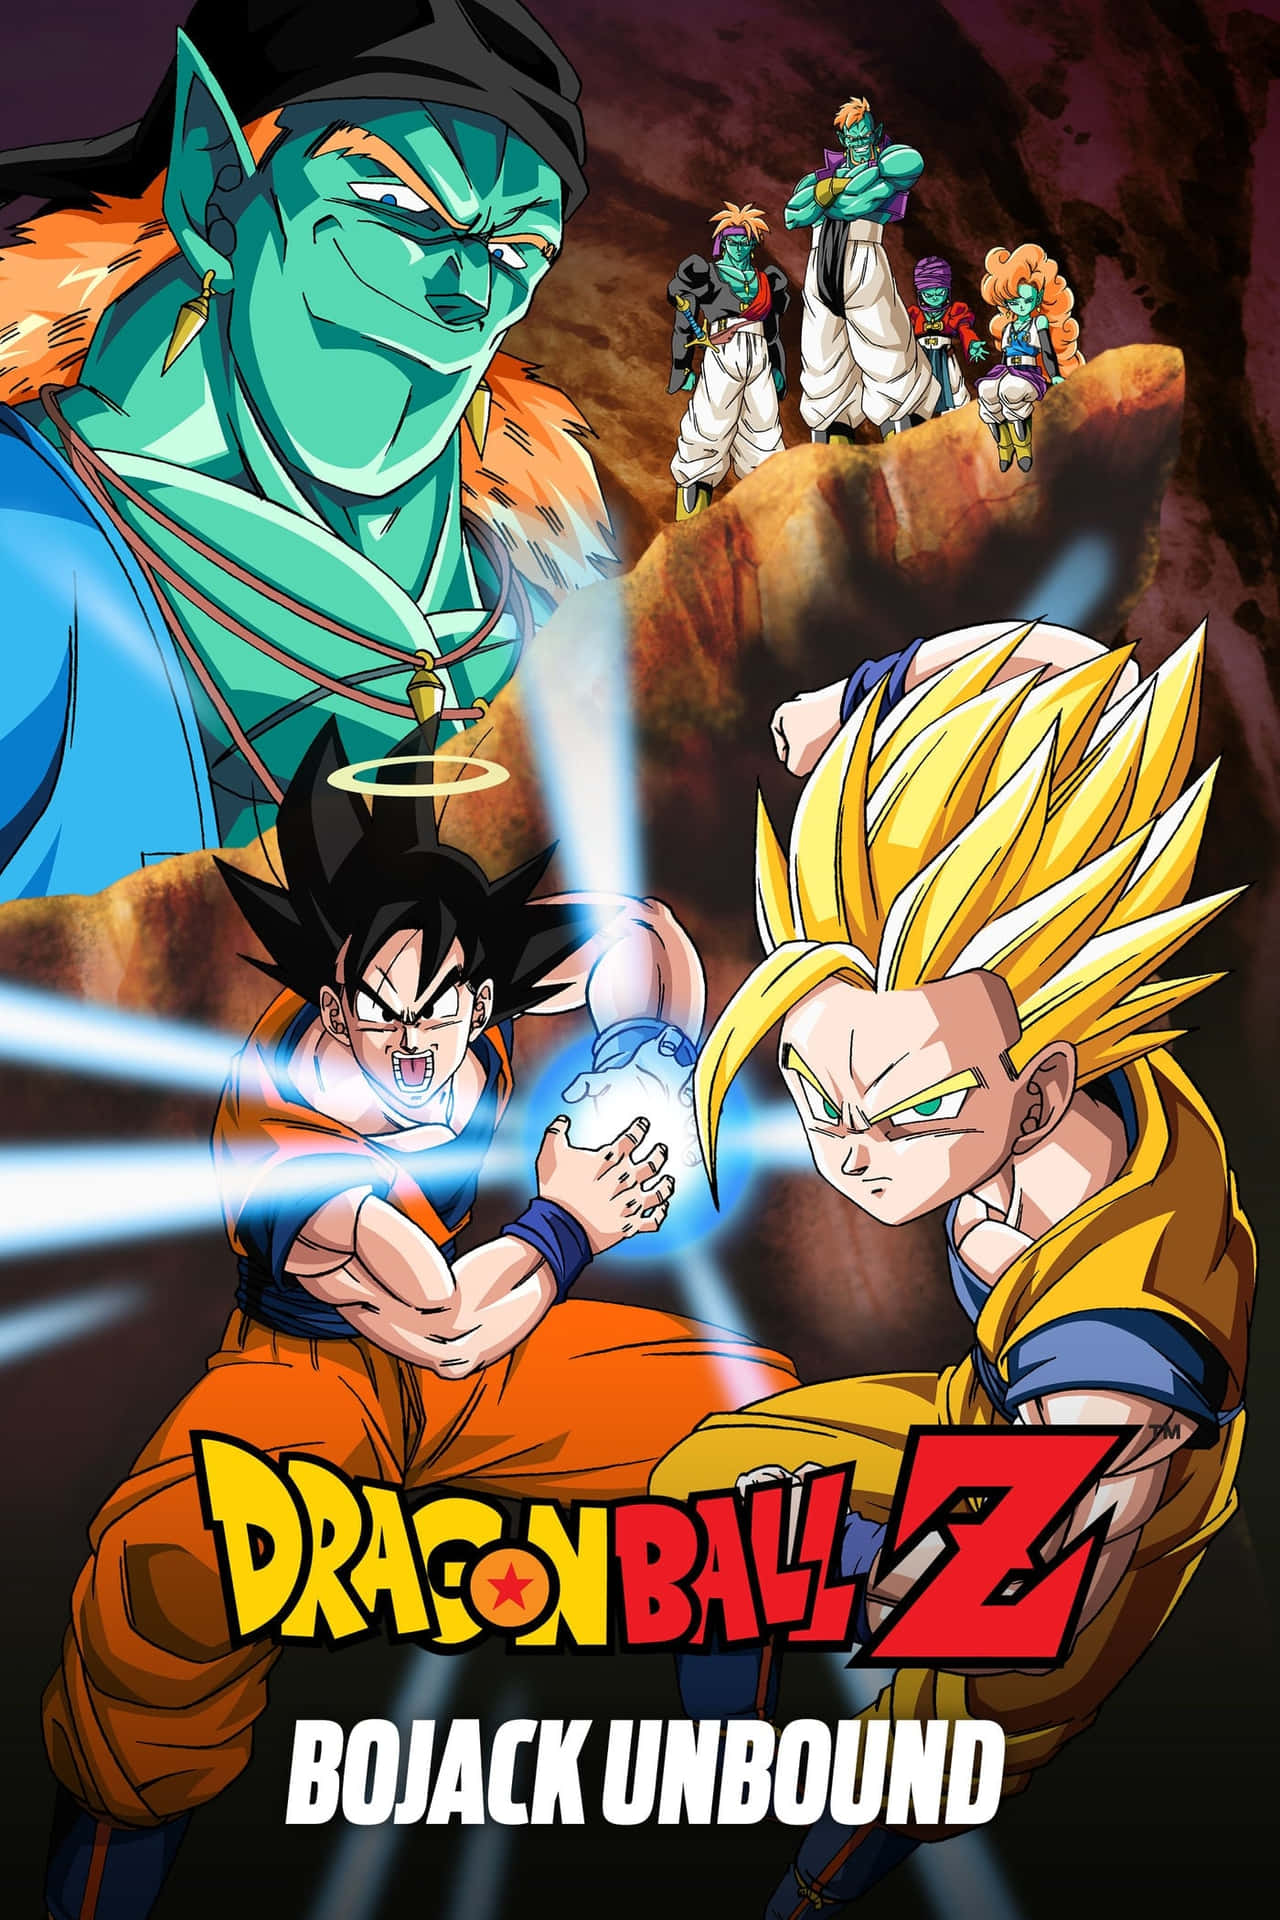 /Descritpion: Enjoy the action-packed adventures of Dragon Ball Z movies, brought to life with stunning visuals and a unique soundtrack! Wallpaper